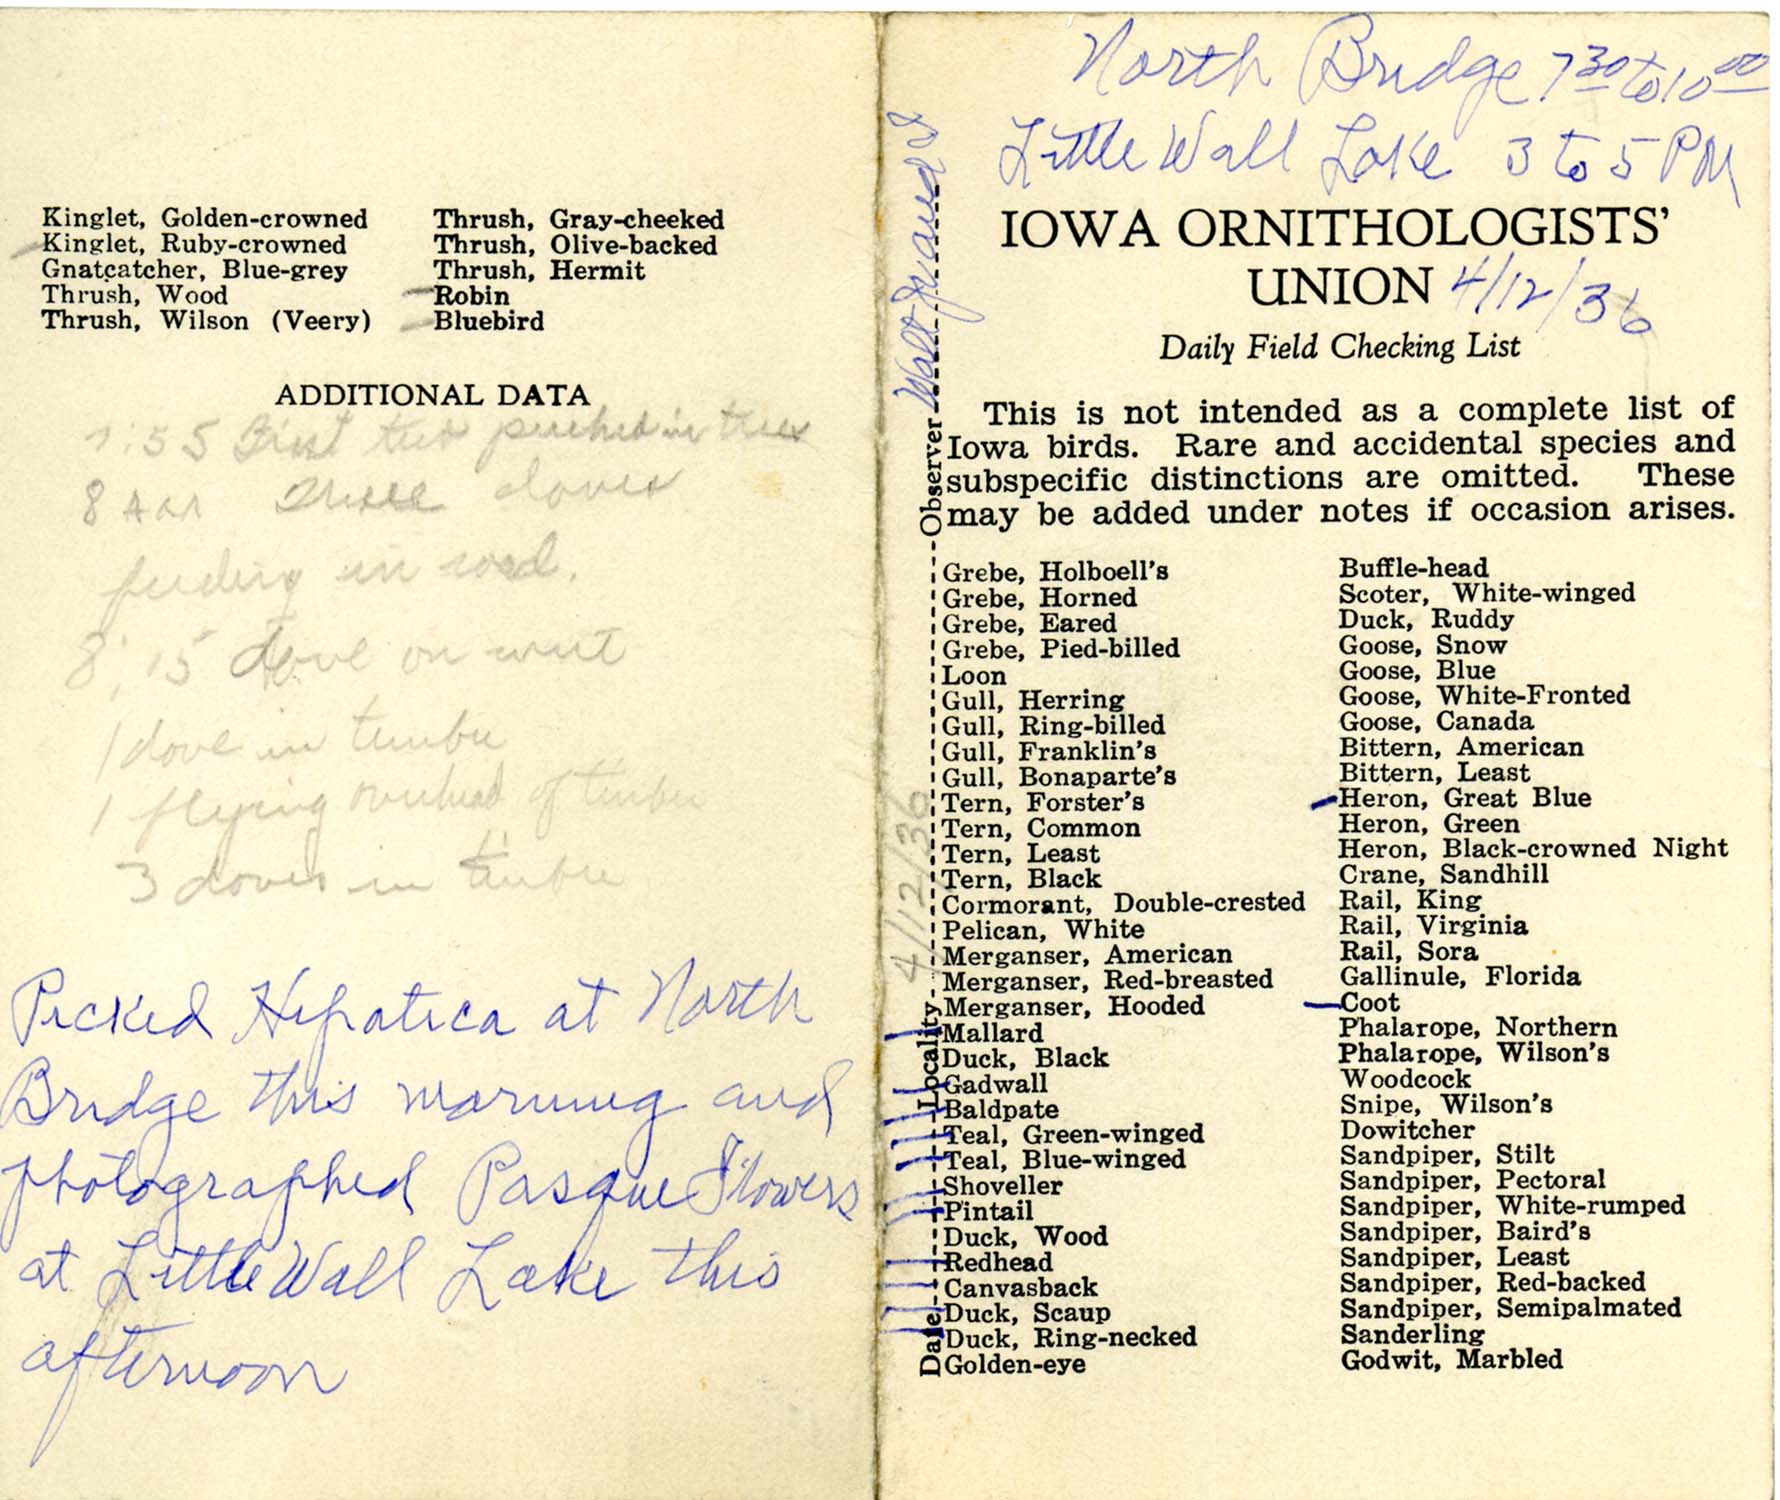 Daily field checking list by Walter Rosene, April 12, 1936